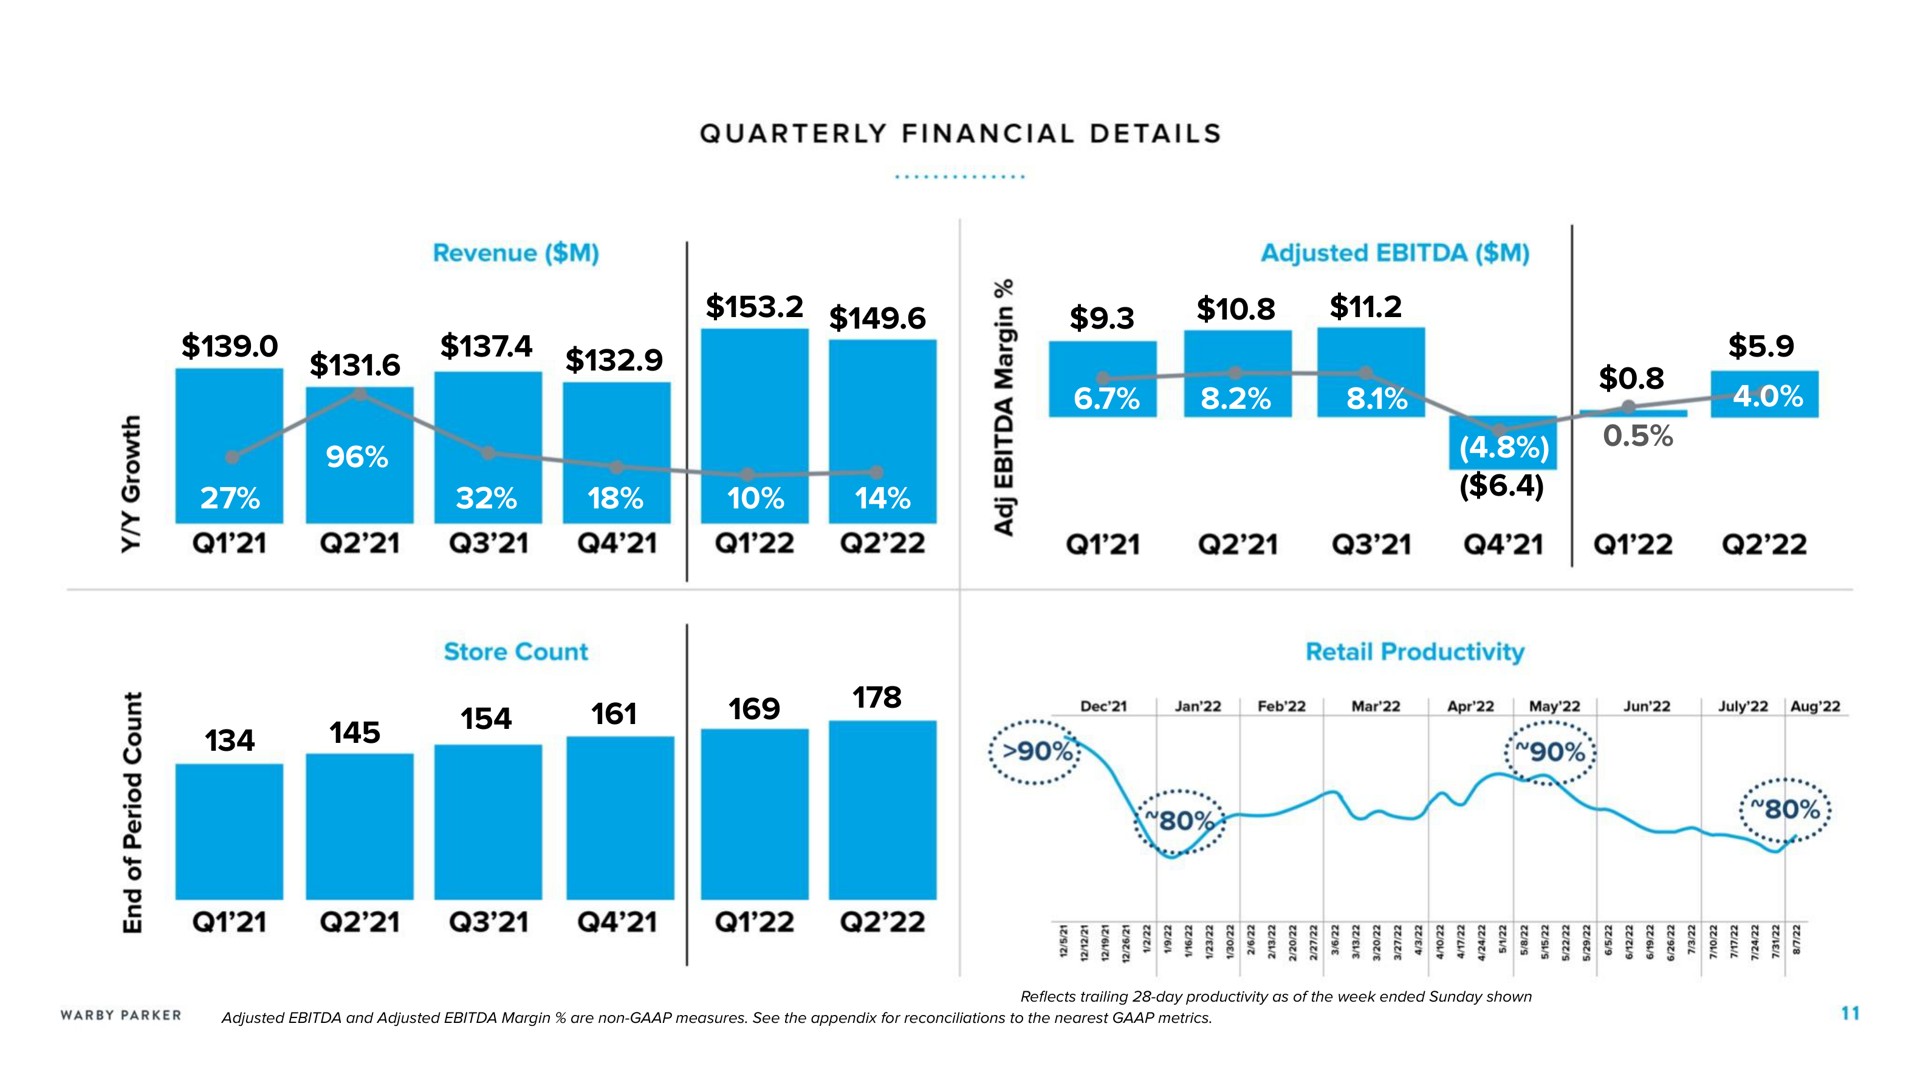 revenue i quarterly financial details adjusted a store count retail productivity mar may tew to a | Warby Parker